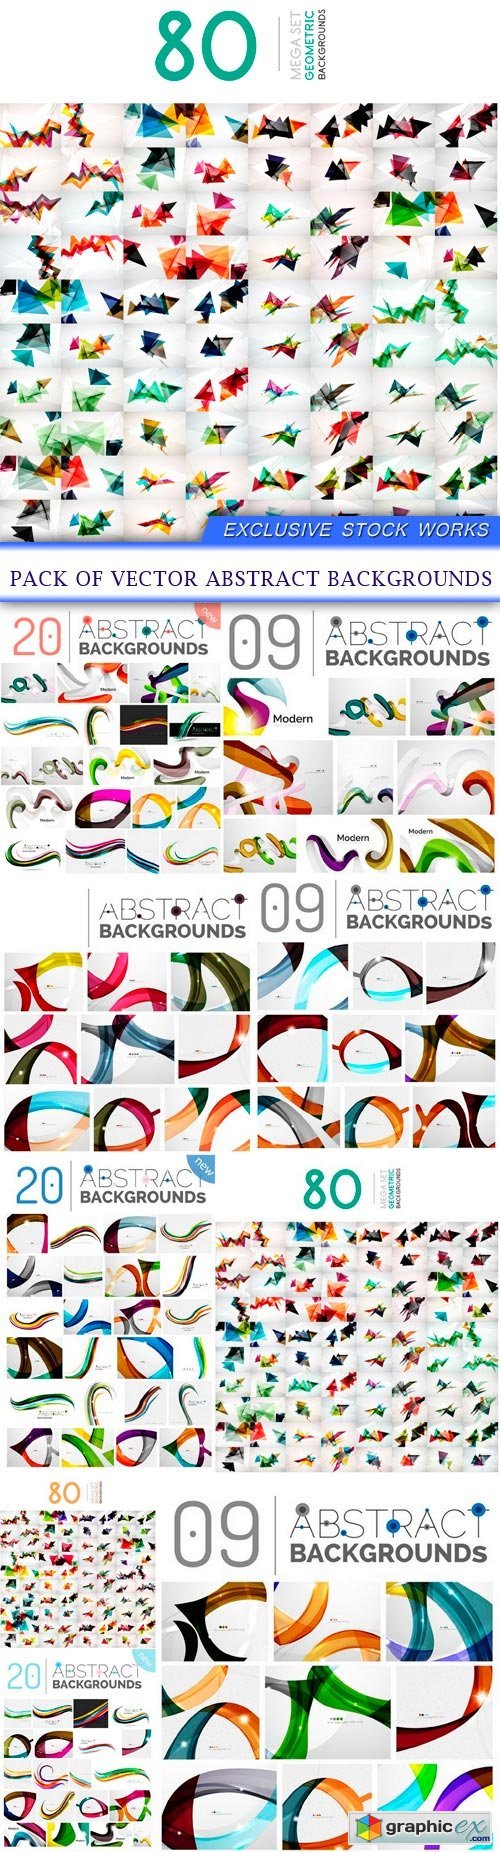 Pack of vector abstract backgrounds 9X EPS